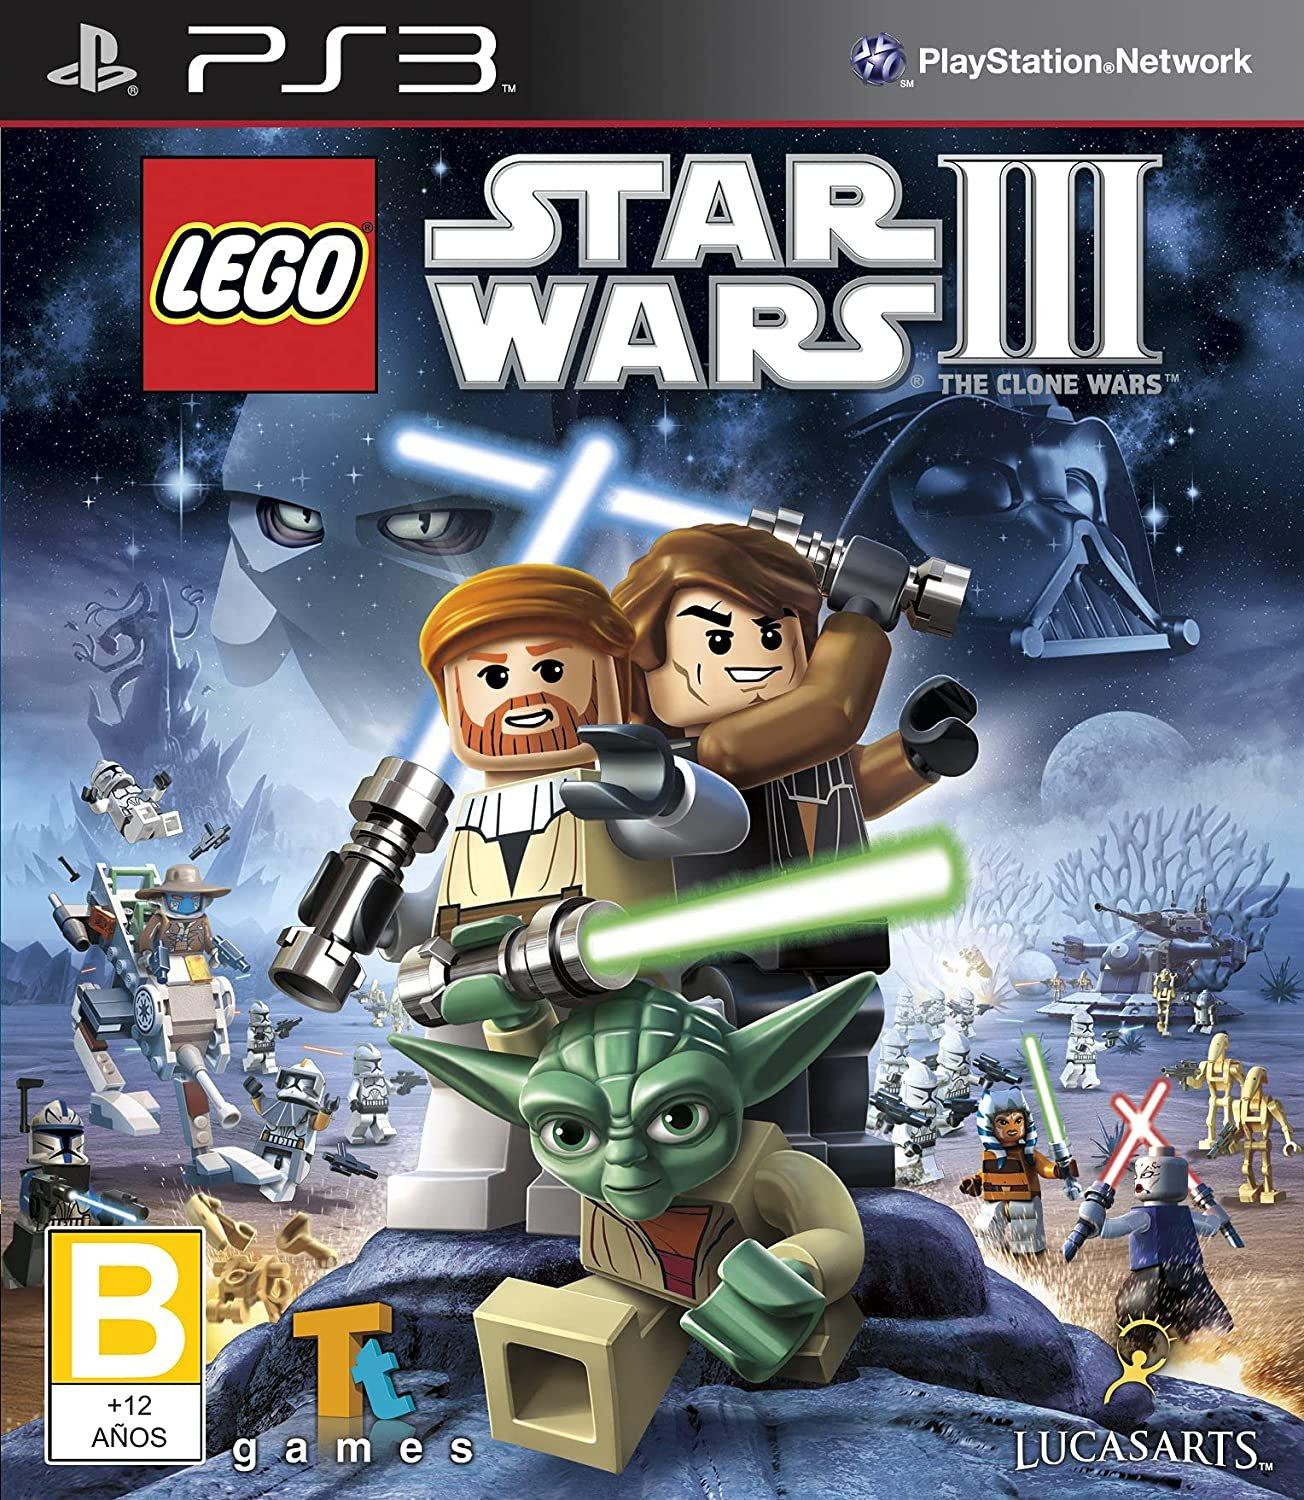 Is there co-op in LEGO Star Wars Skywalker Saga? - Pro Game Guides